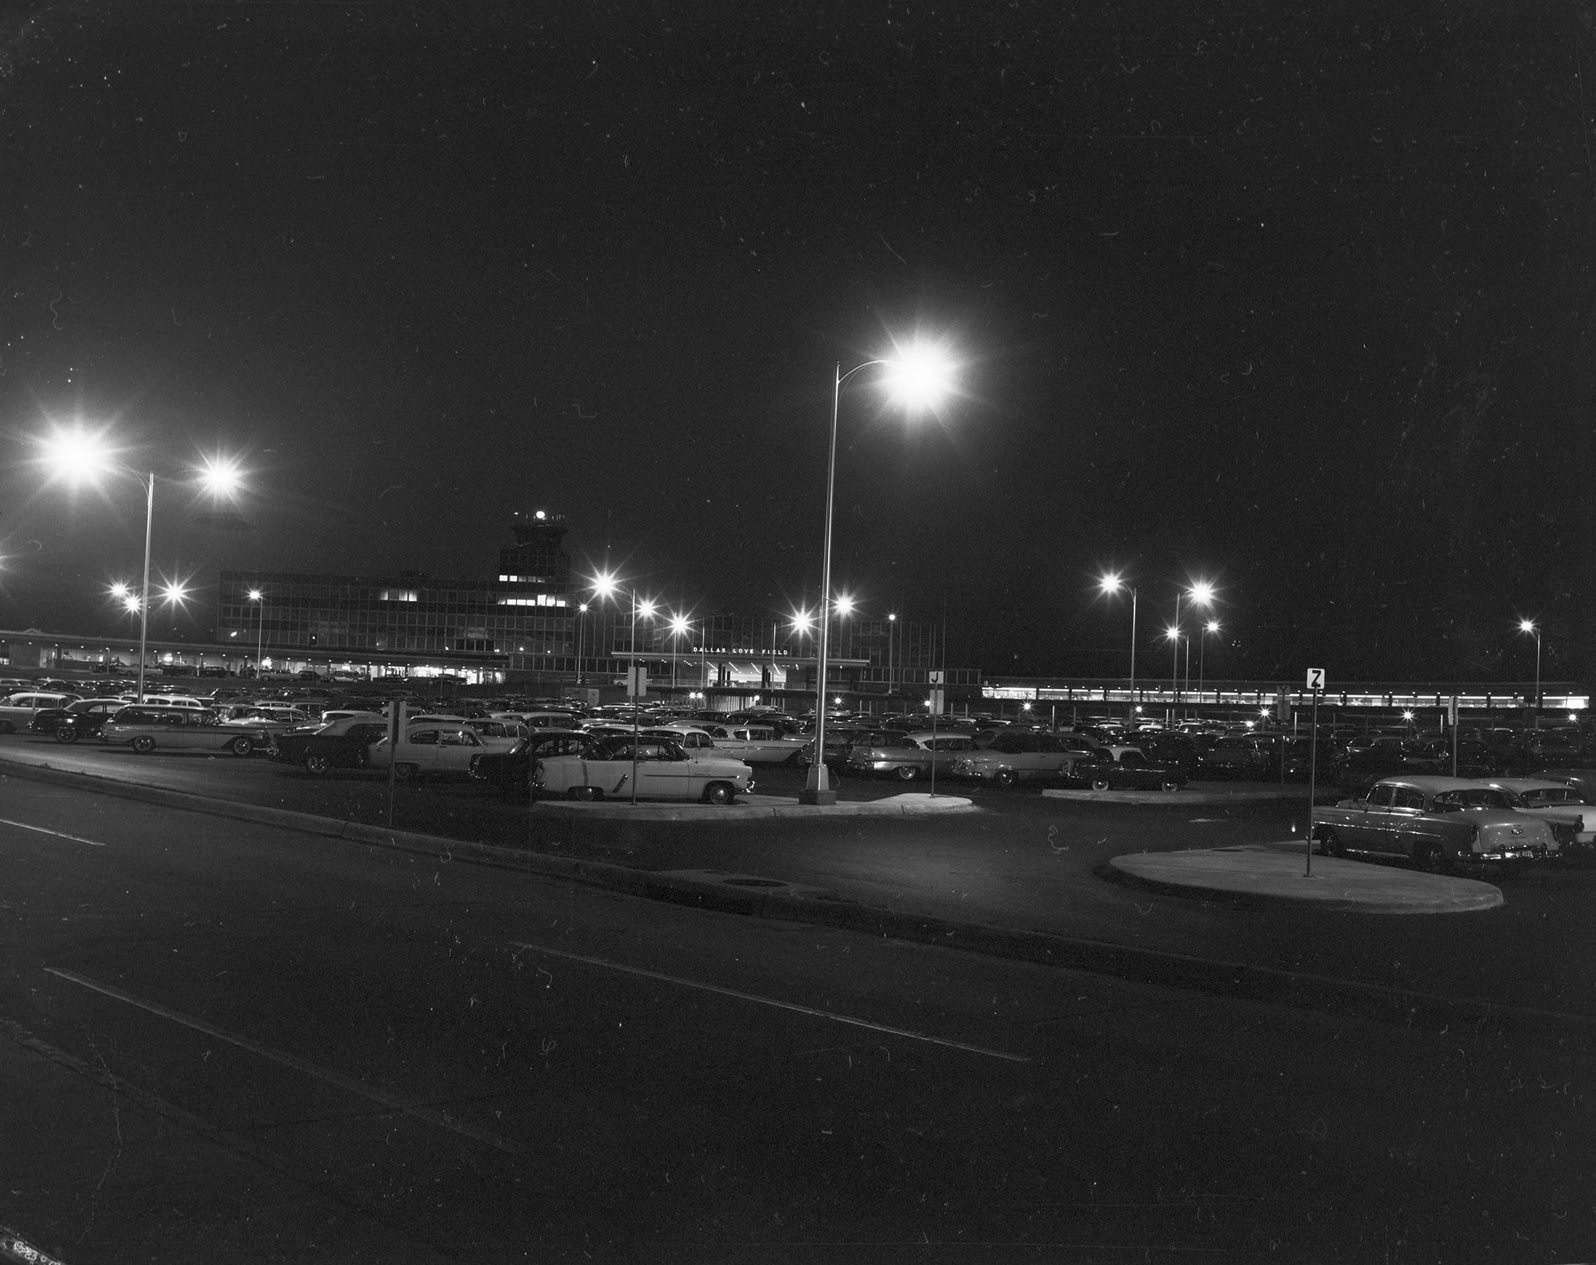 Dallas Love Field at night, 1950. There are lampposts with the lights on. There are automobiles parked on the parking lot.